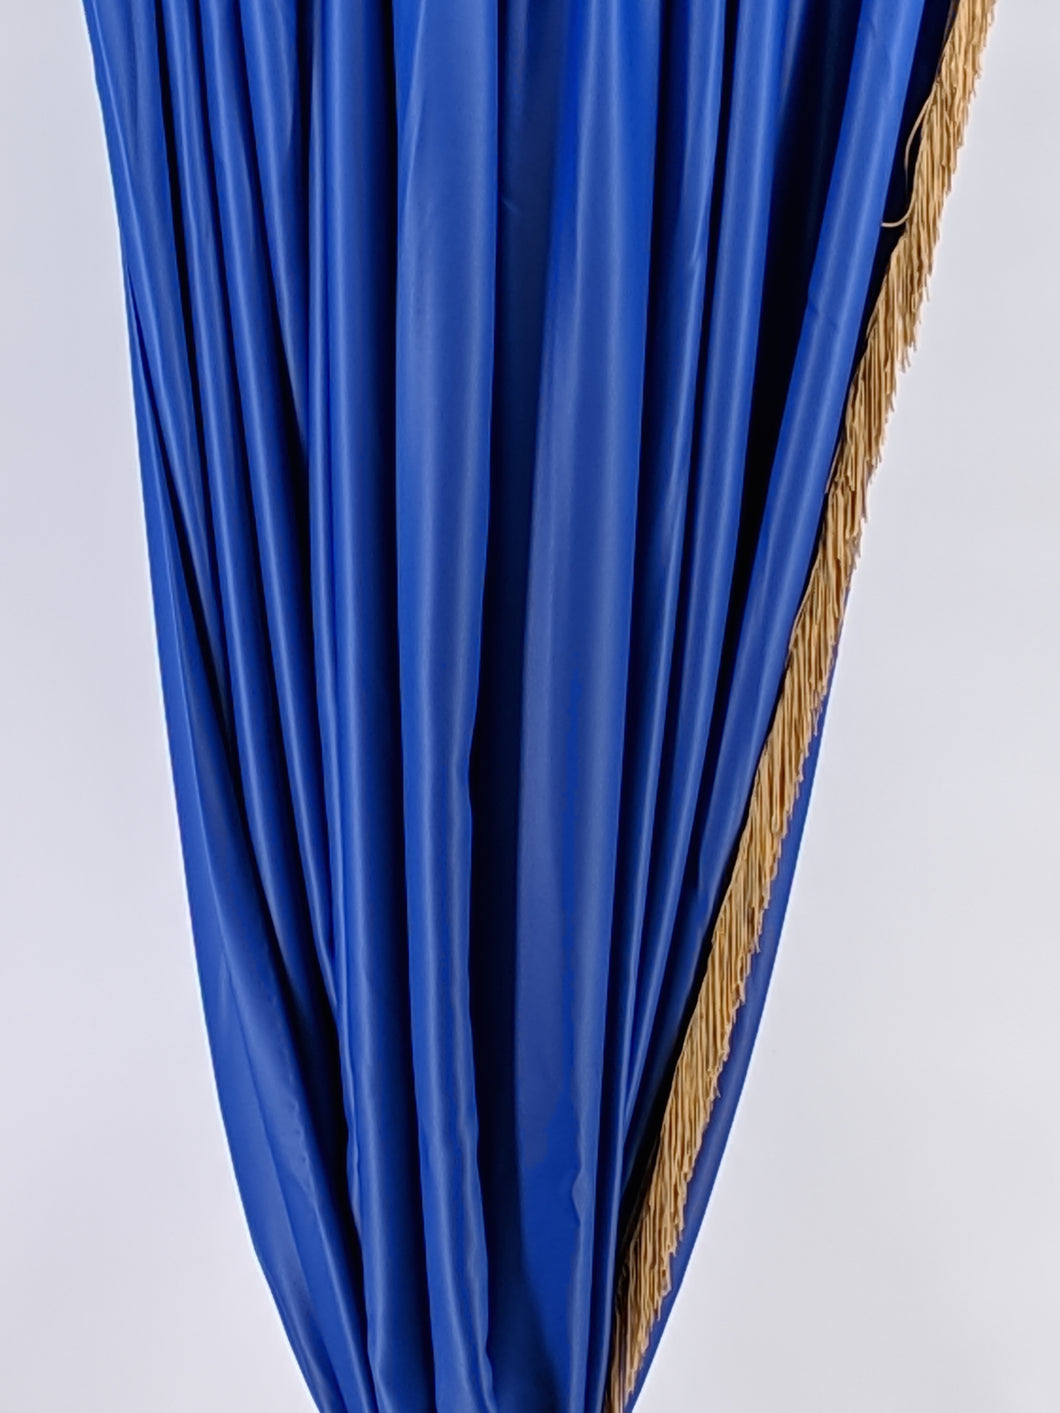 9089 - Blue Poly Satin, with gold fringe. Pinch Pleat